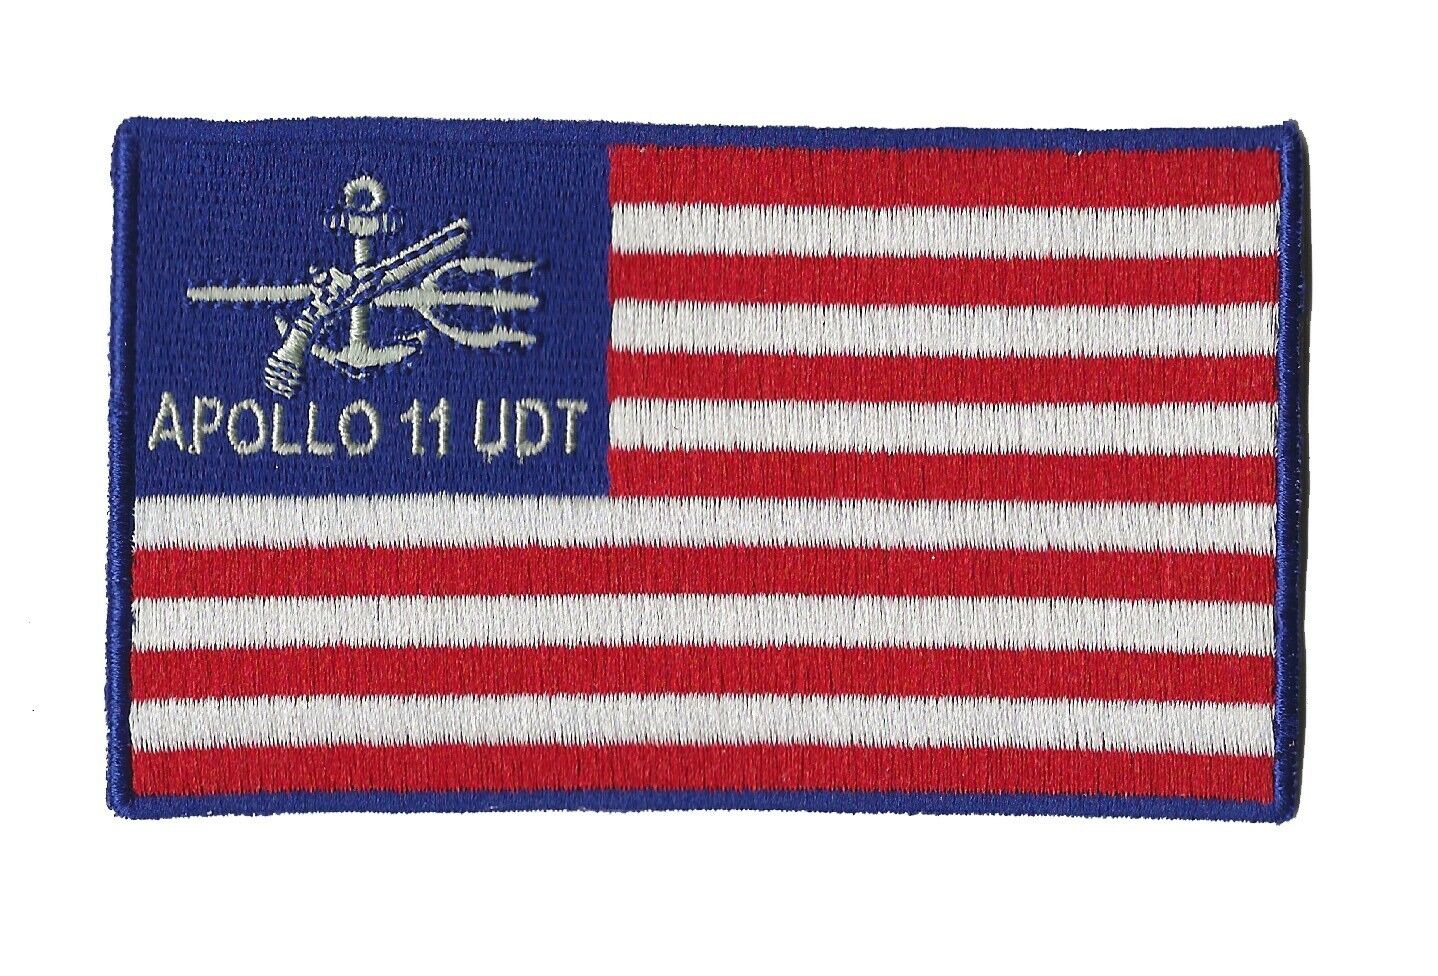 Apollo 11 NASA US Navy UDT flag space recovery force ship patch